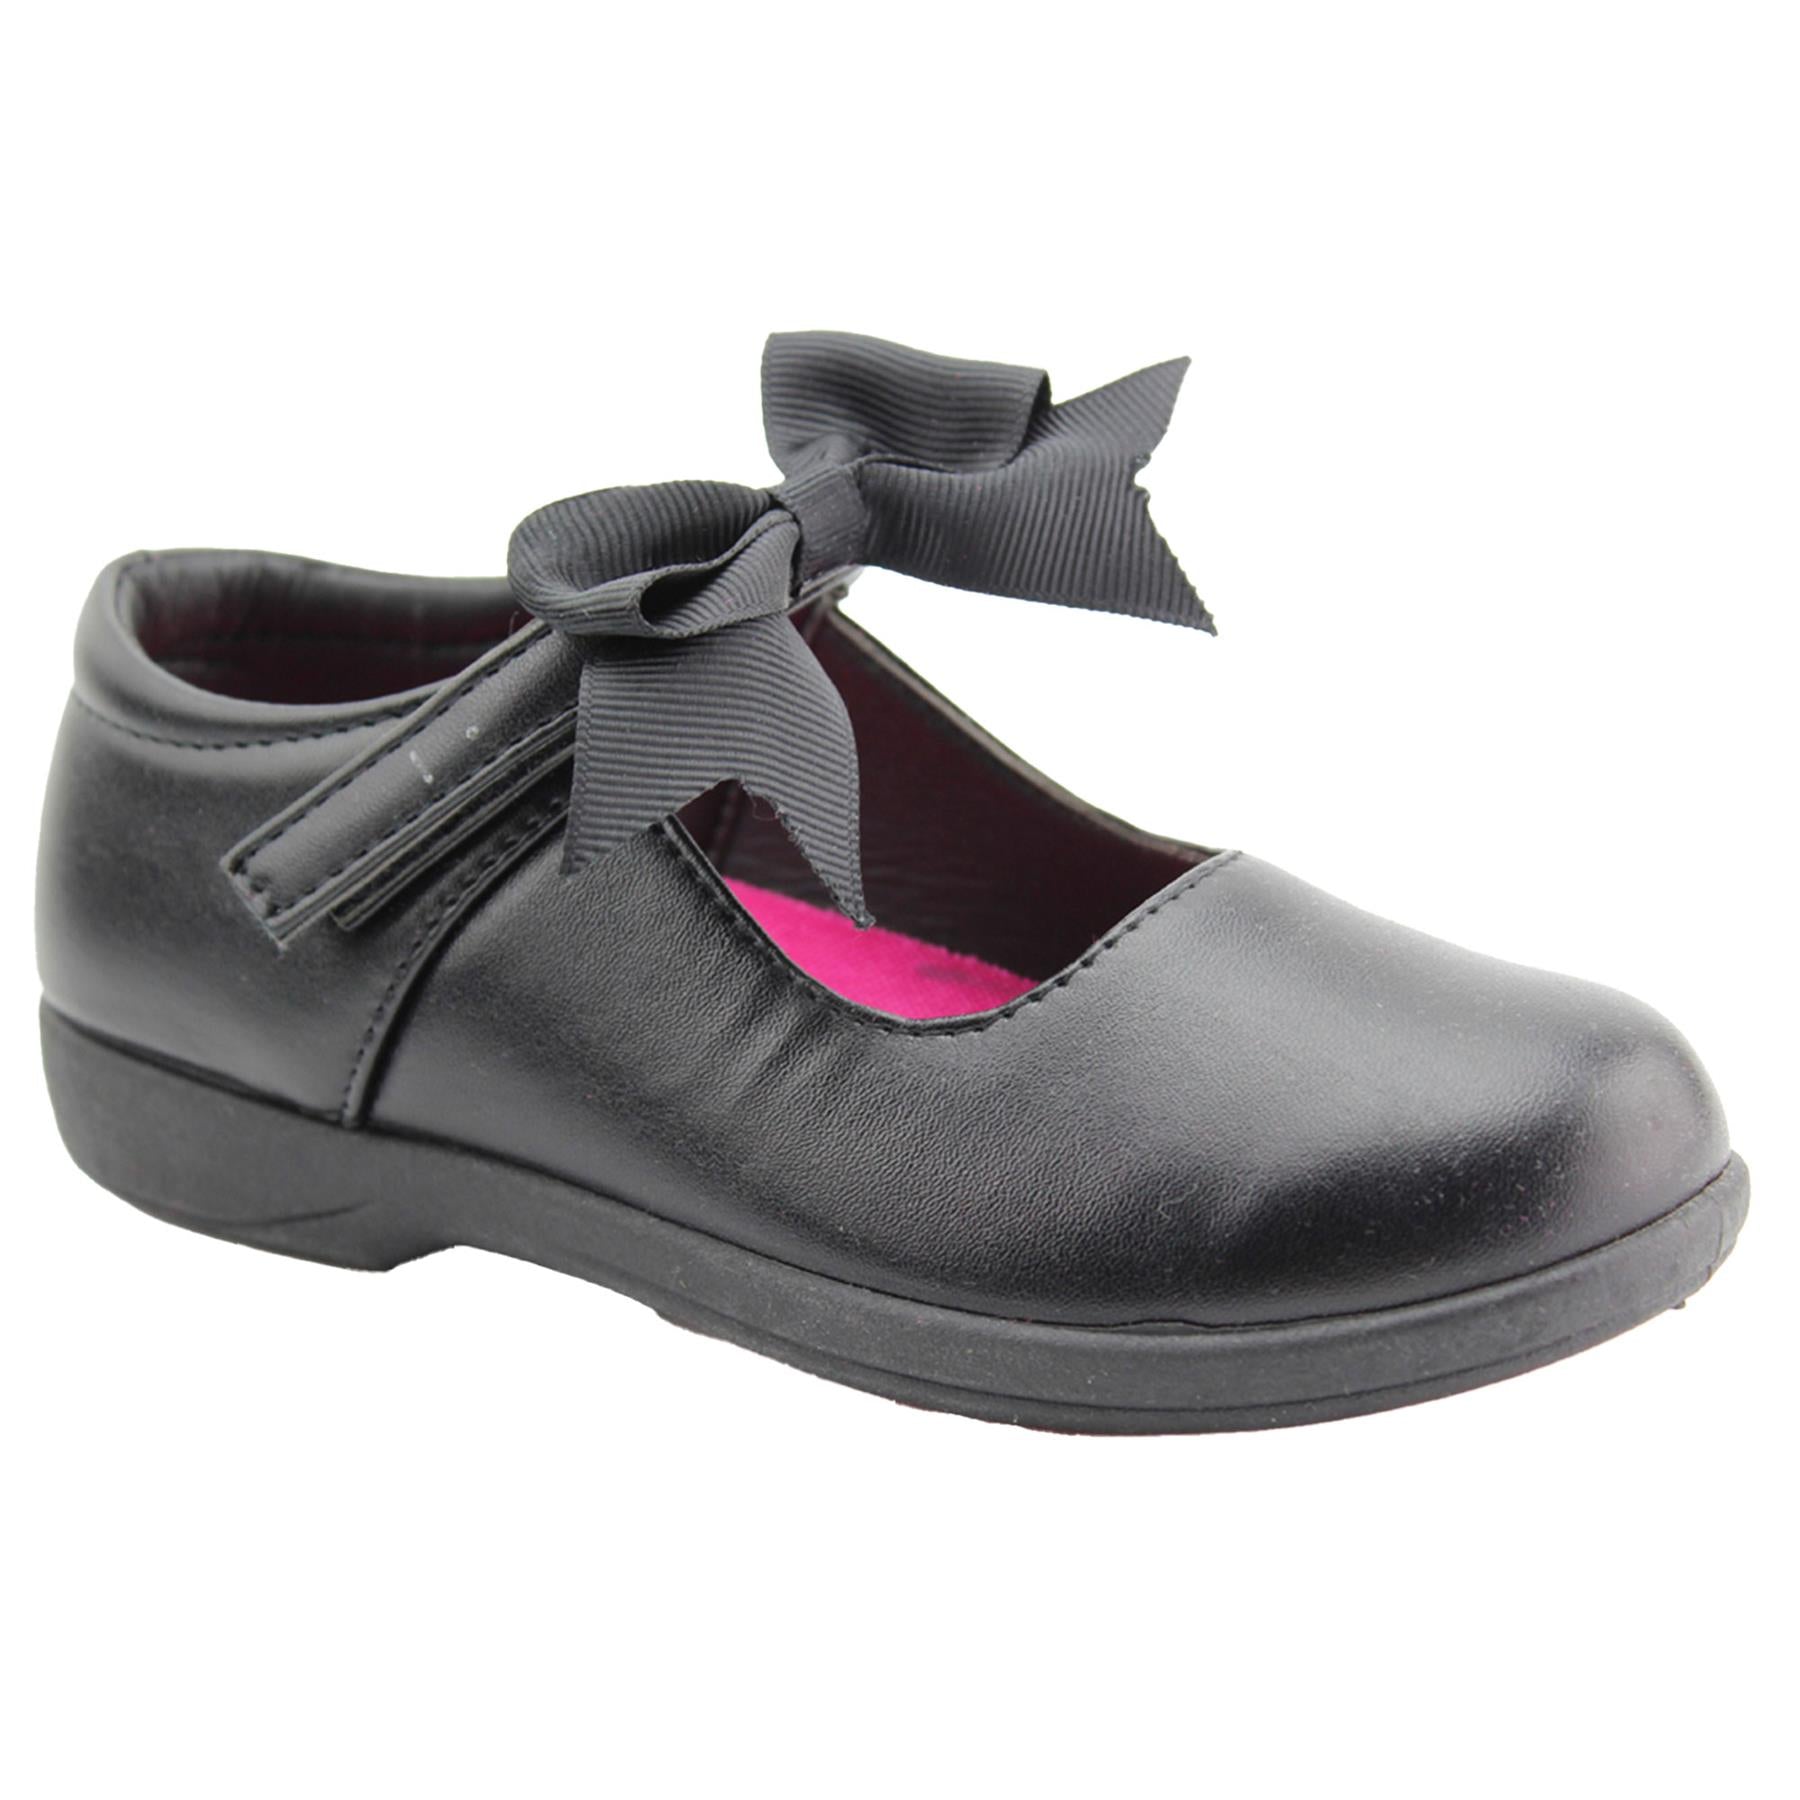 A2Z 4 Kids Girls Touch Fasten Black PU Leather Shoes With Bow Back to School